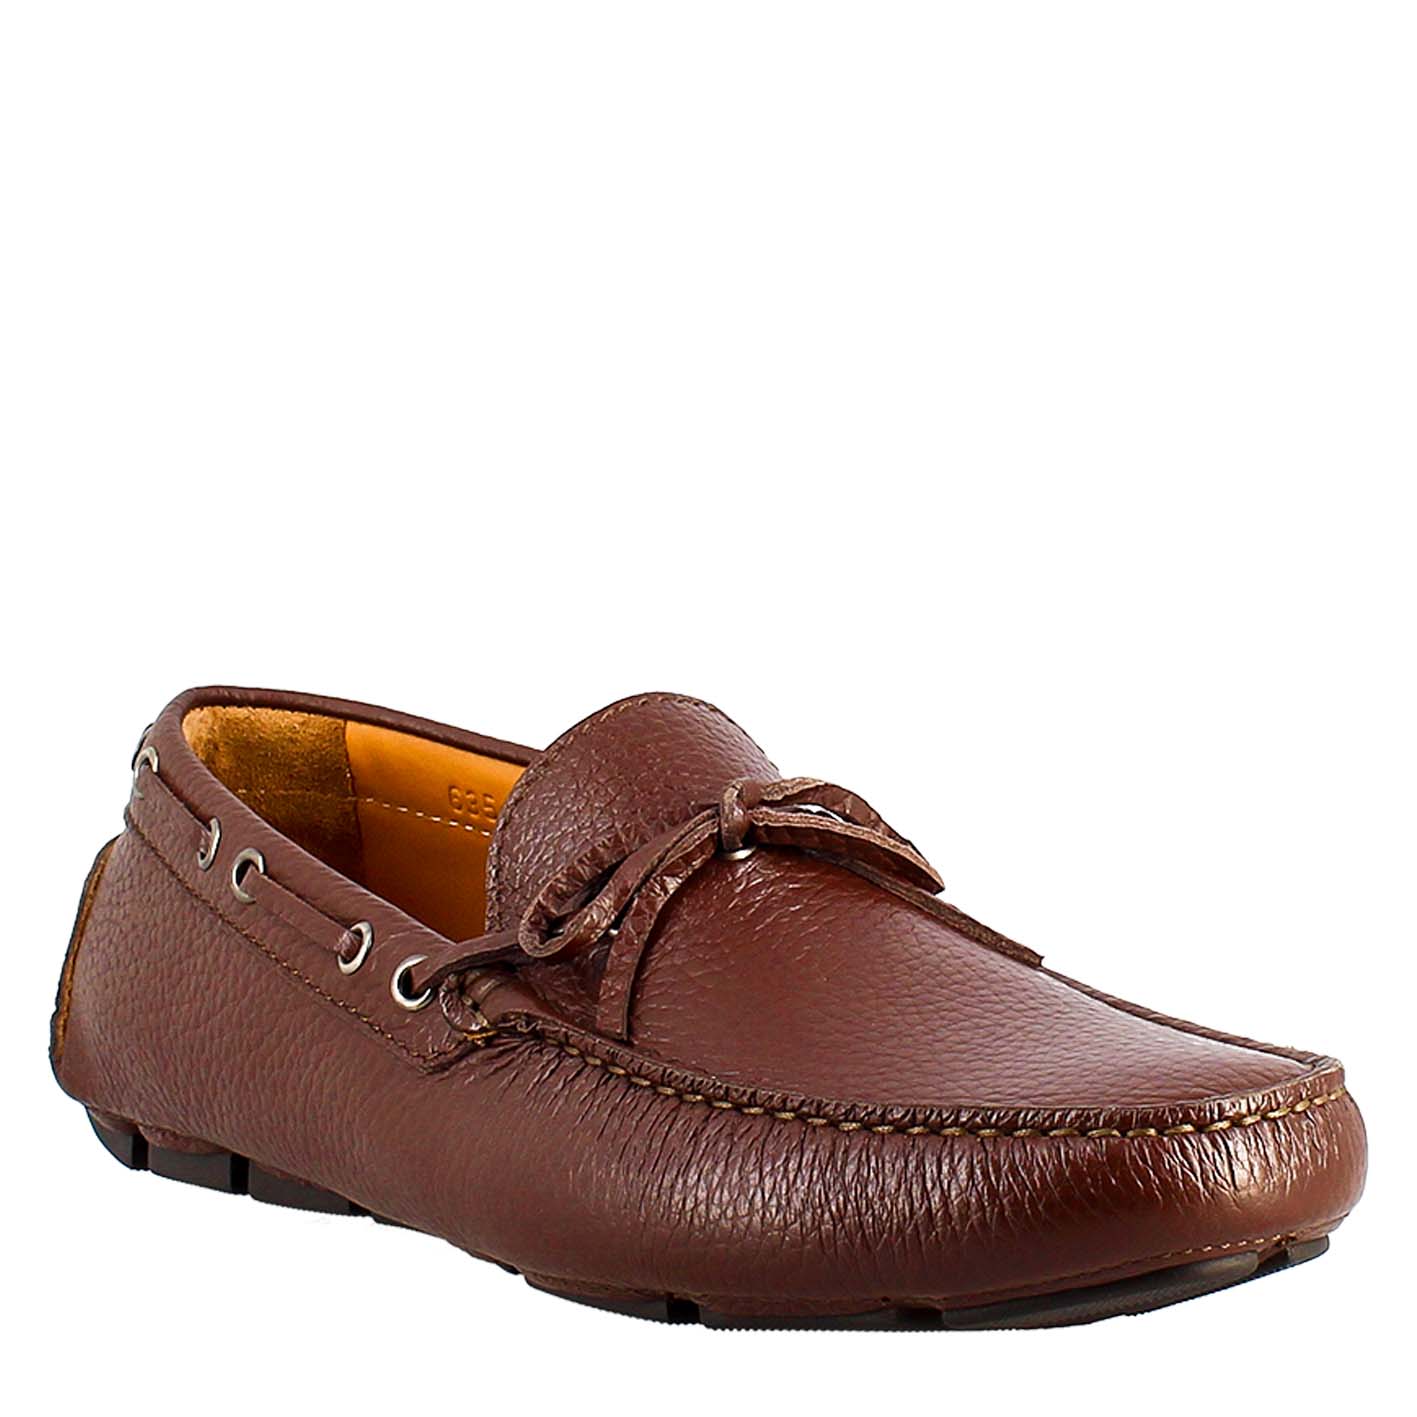 Carshoe Loafers Brown Calf Leather